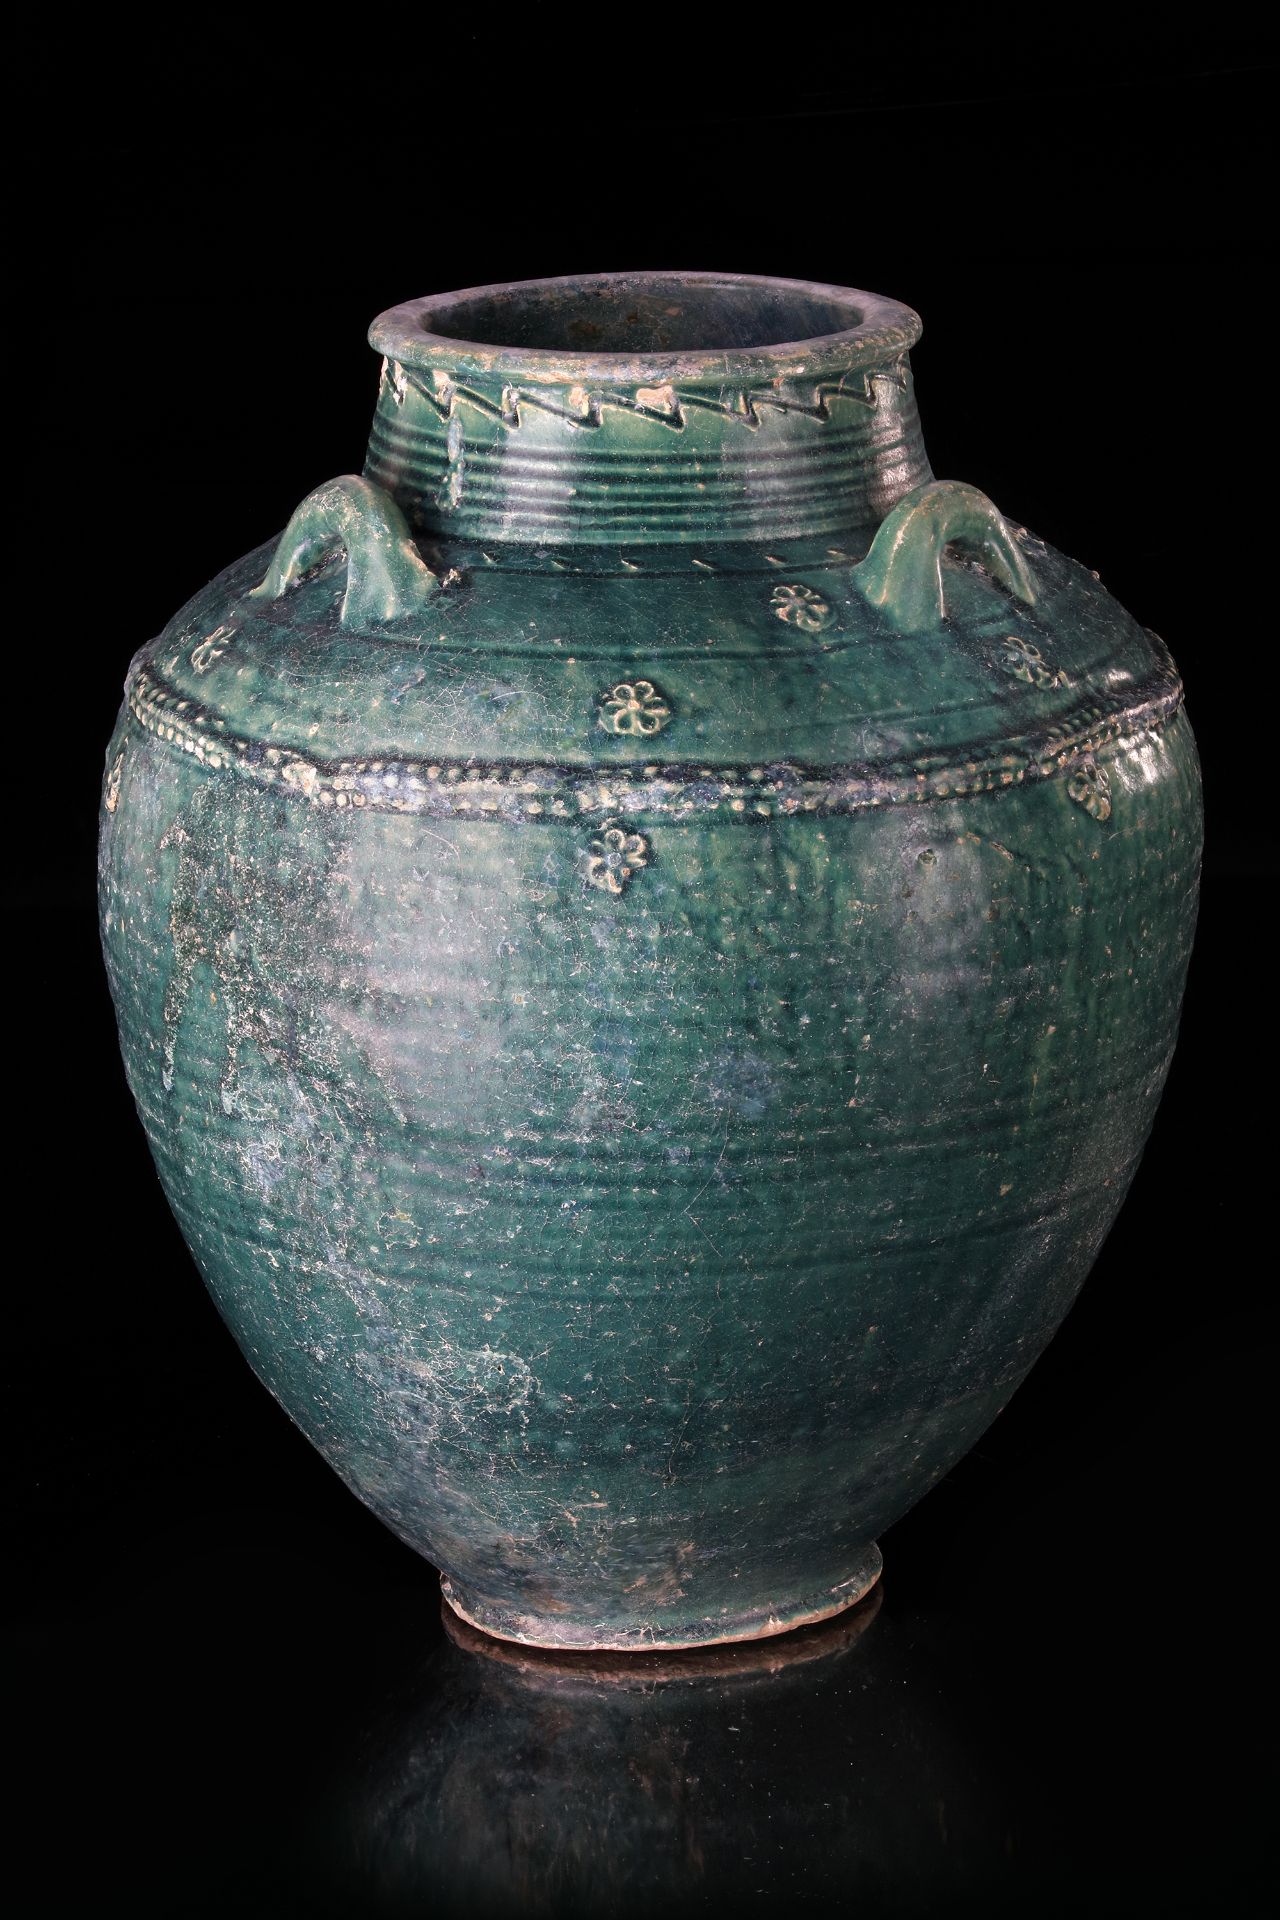 A LARGE POST SASSANIAN TURQUOISE GLAZED POTTERY STORAGE JAR, PERSIA, 6TH-8TH CENTURY - Image 5 of 6